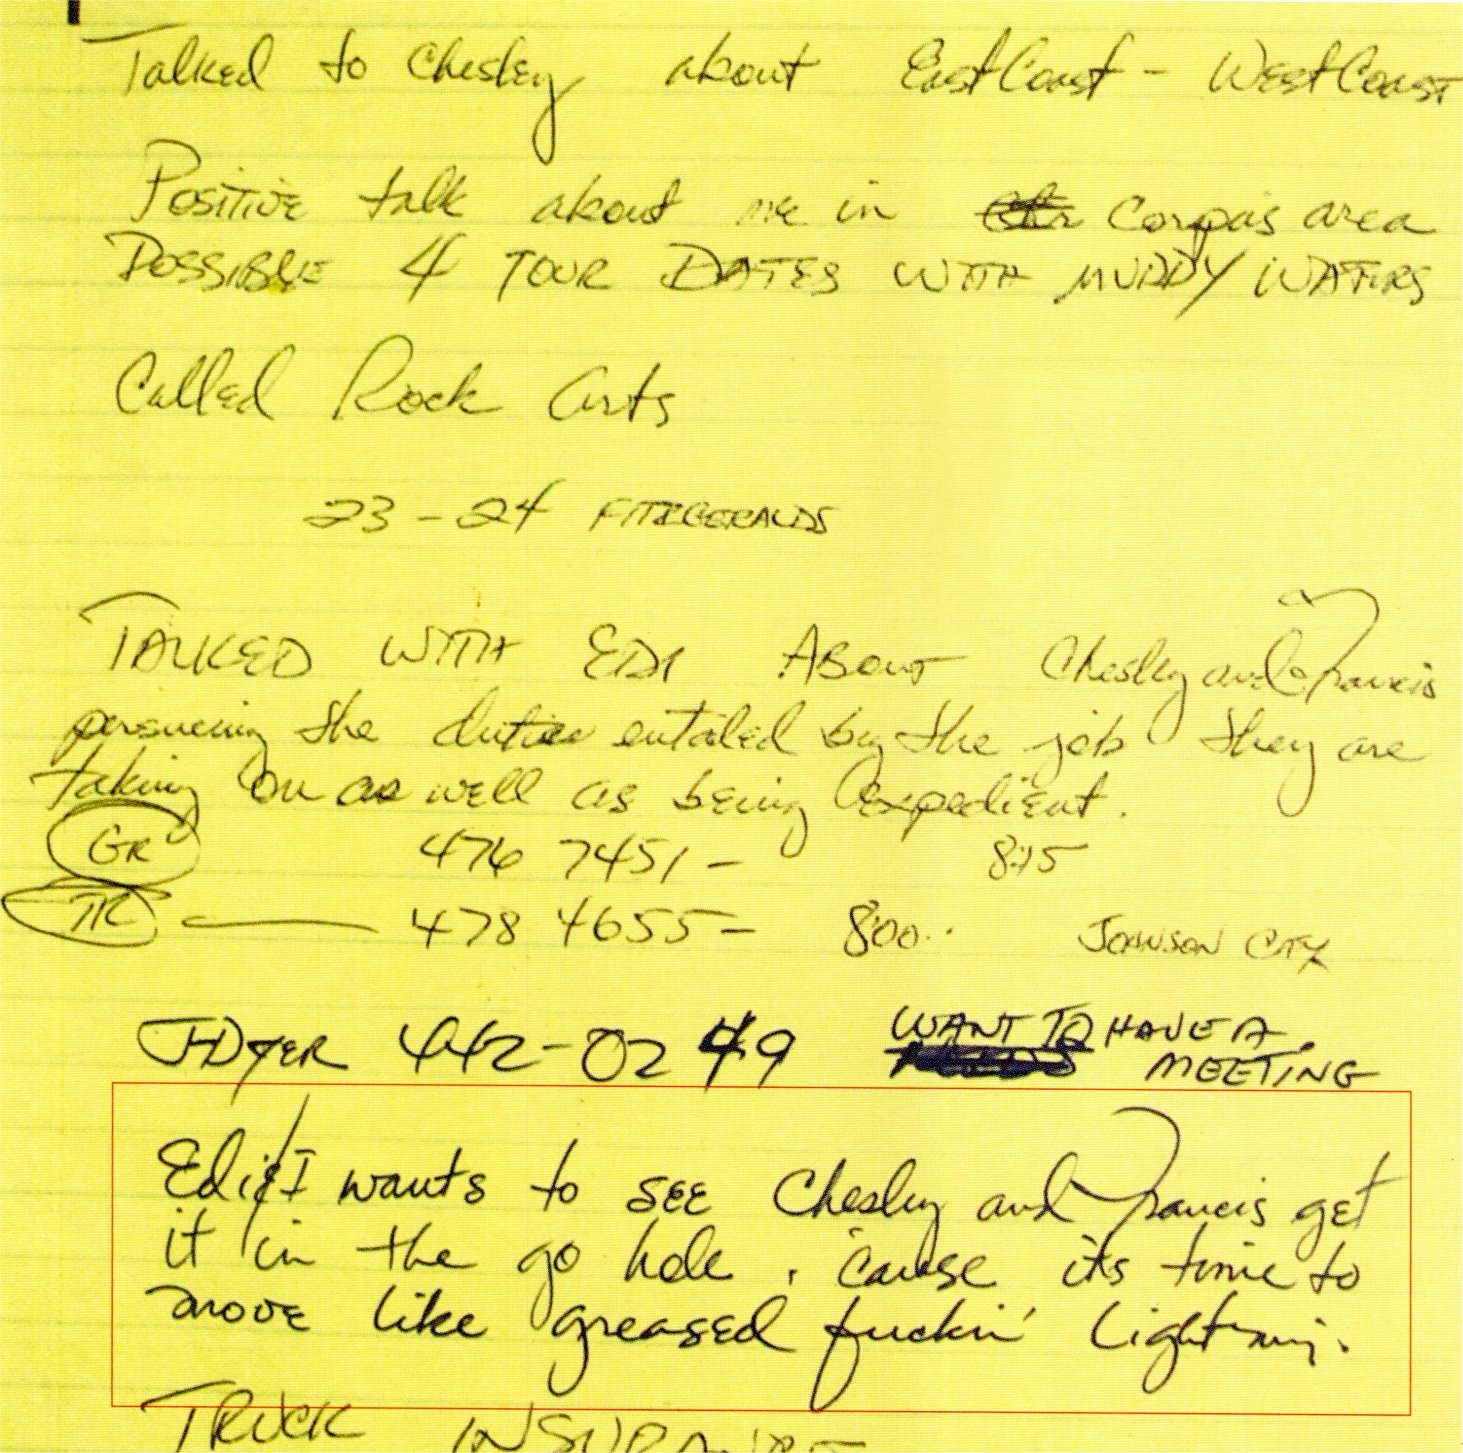 Stevie Ray Vaughan Band Management Notes